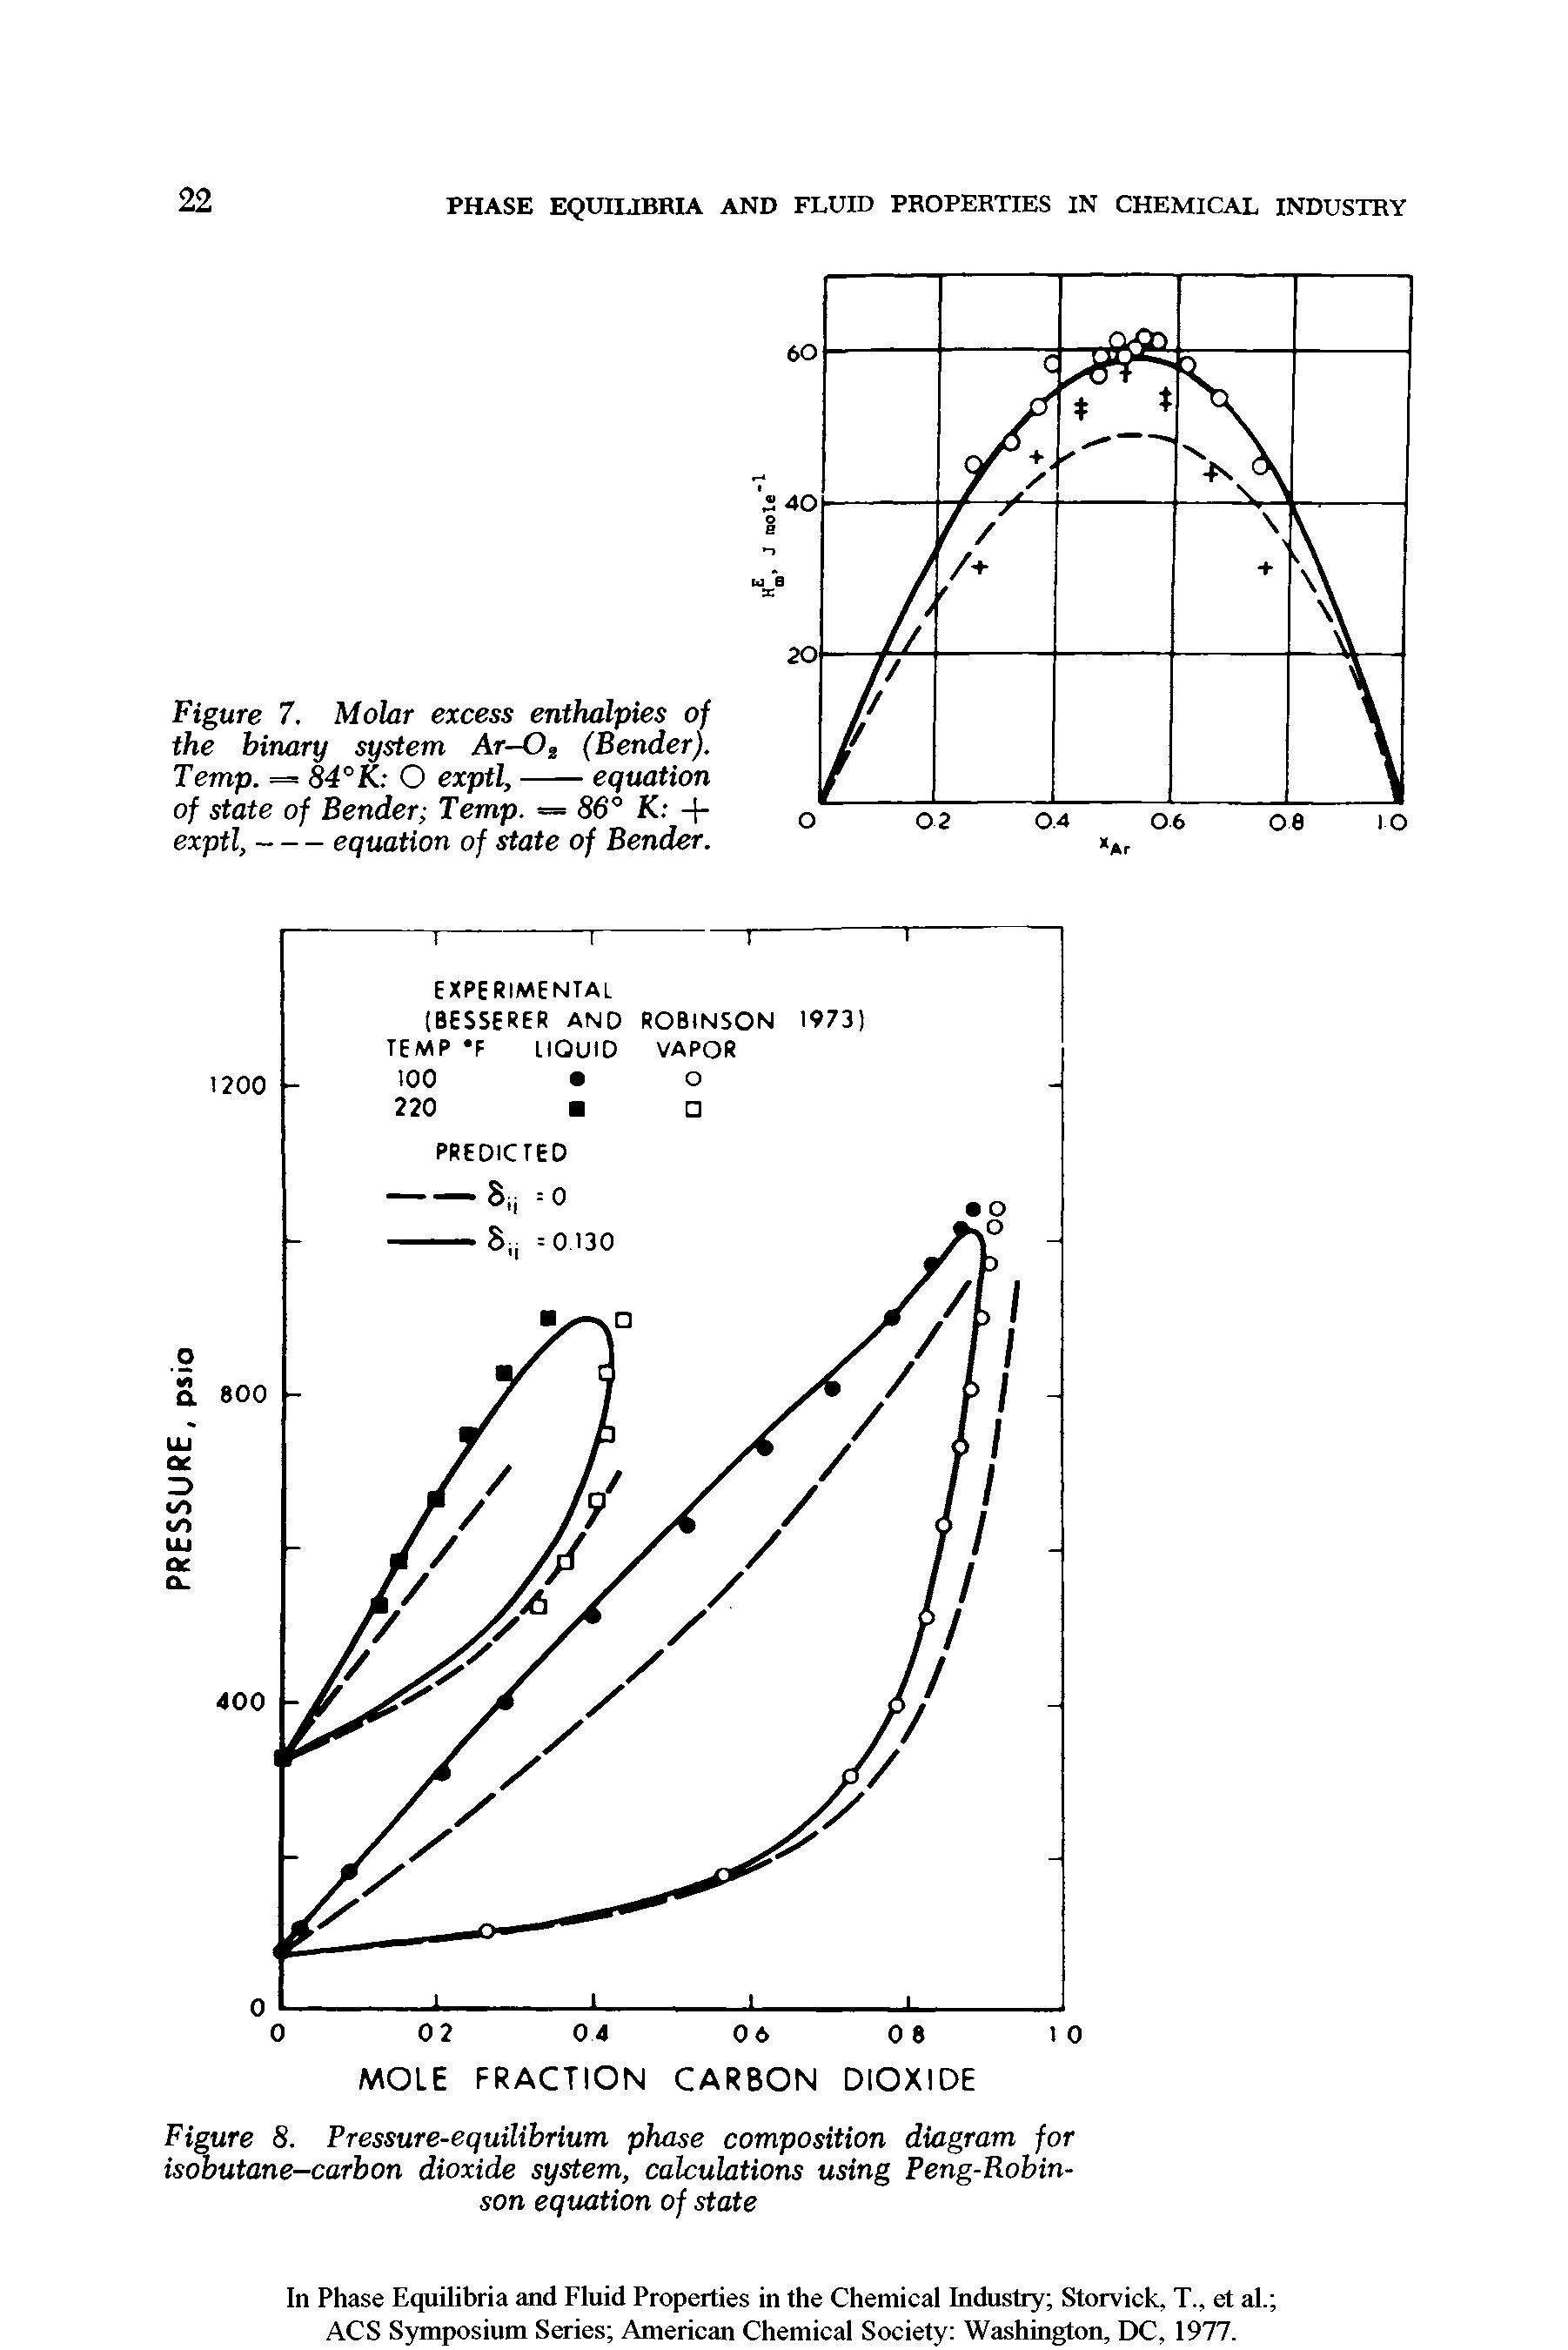 Figure 8. Pressure-equilibrium phase composition diagram for isobutane-carbon dioxide system, calculations using Peng-Robin-son equation of state...